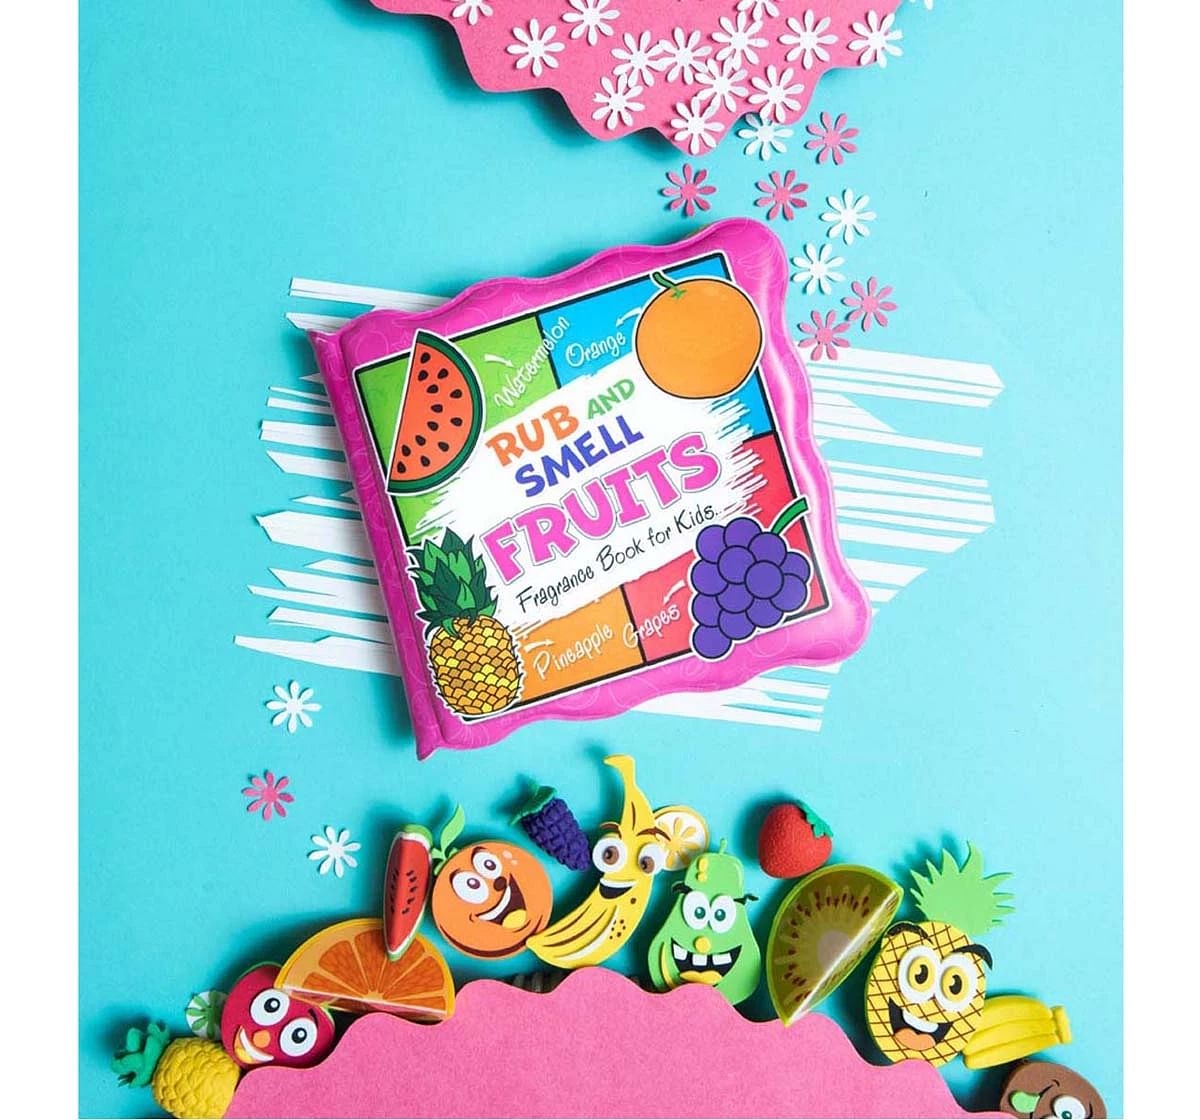 Dreamland Rub and Smell Fruits Books for Kids 3Y+, Multicolour